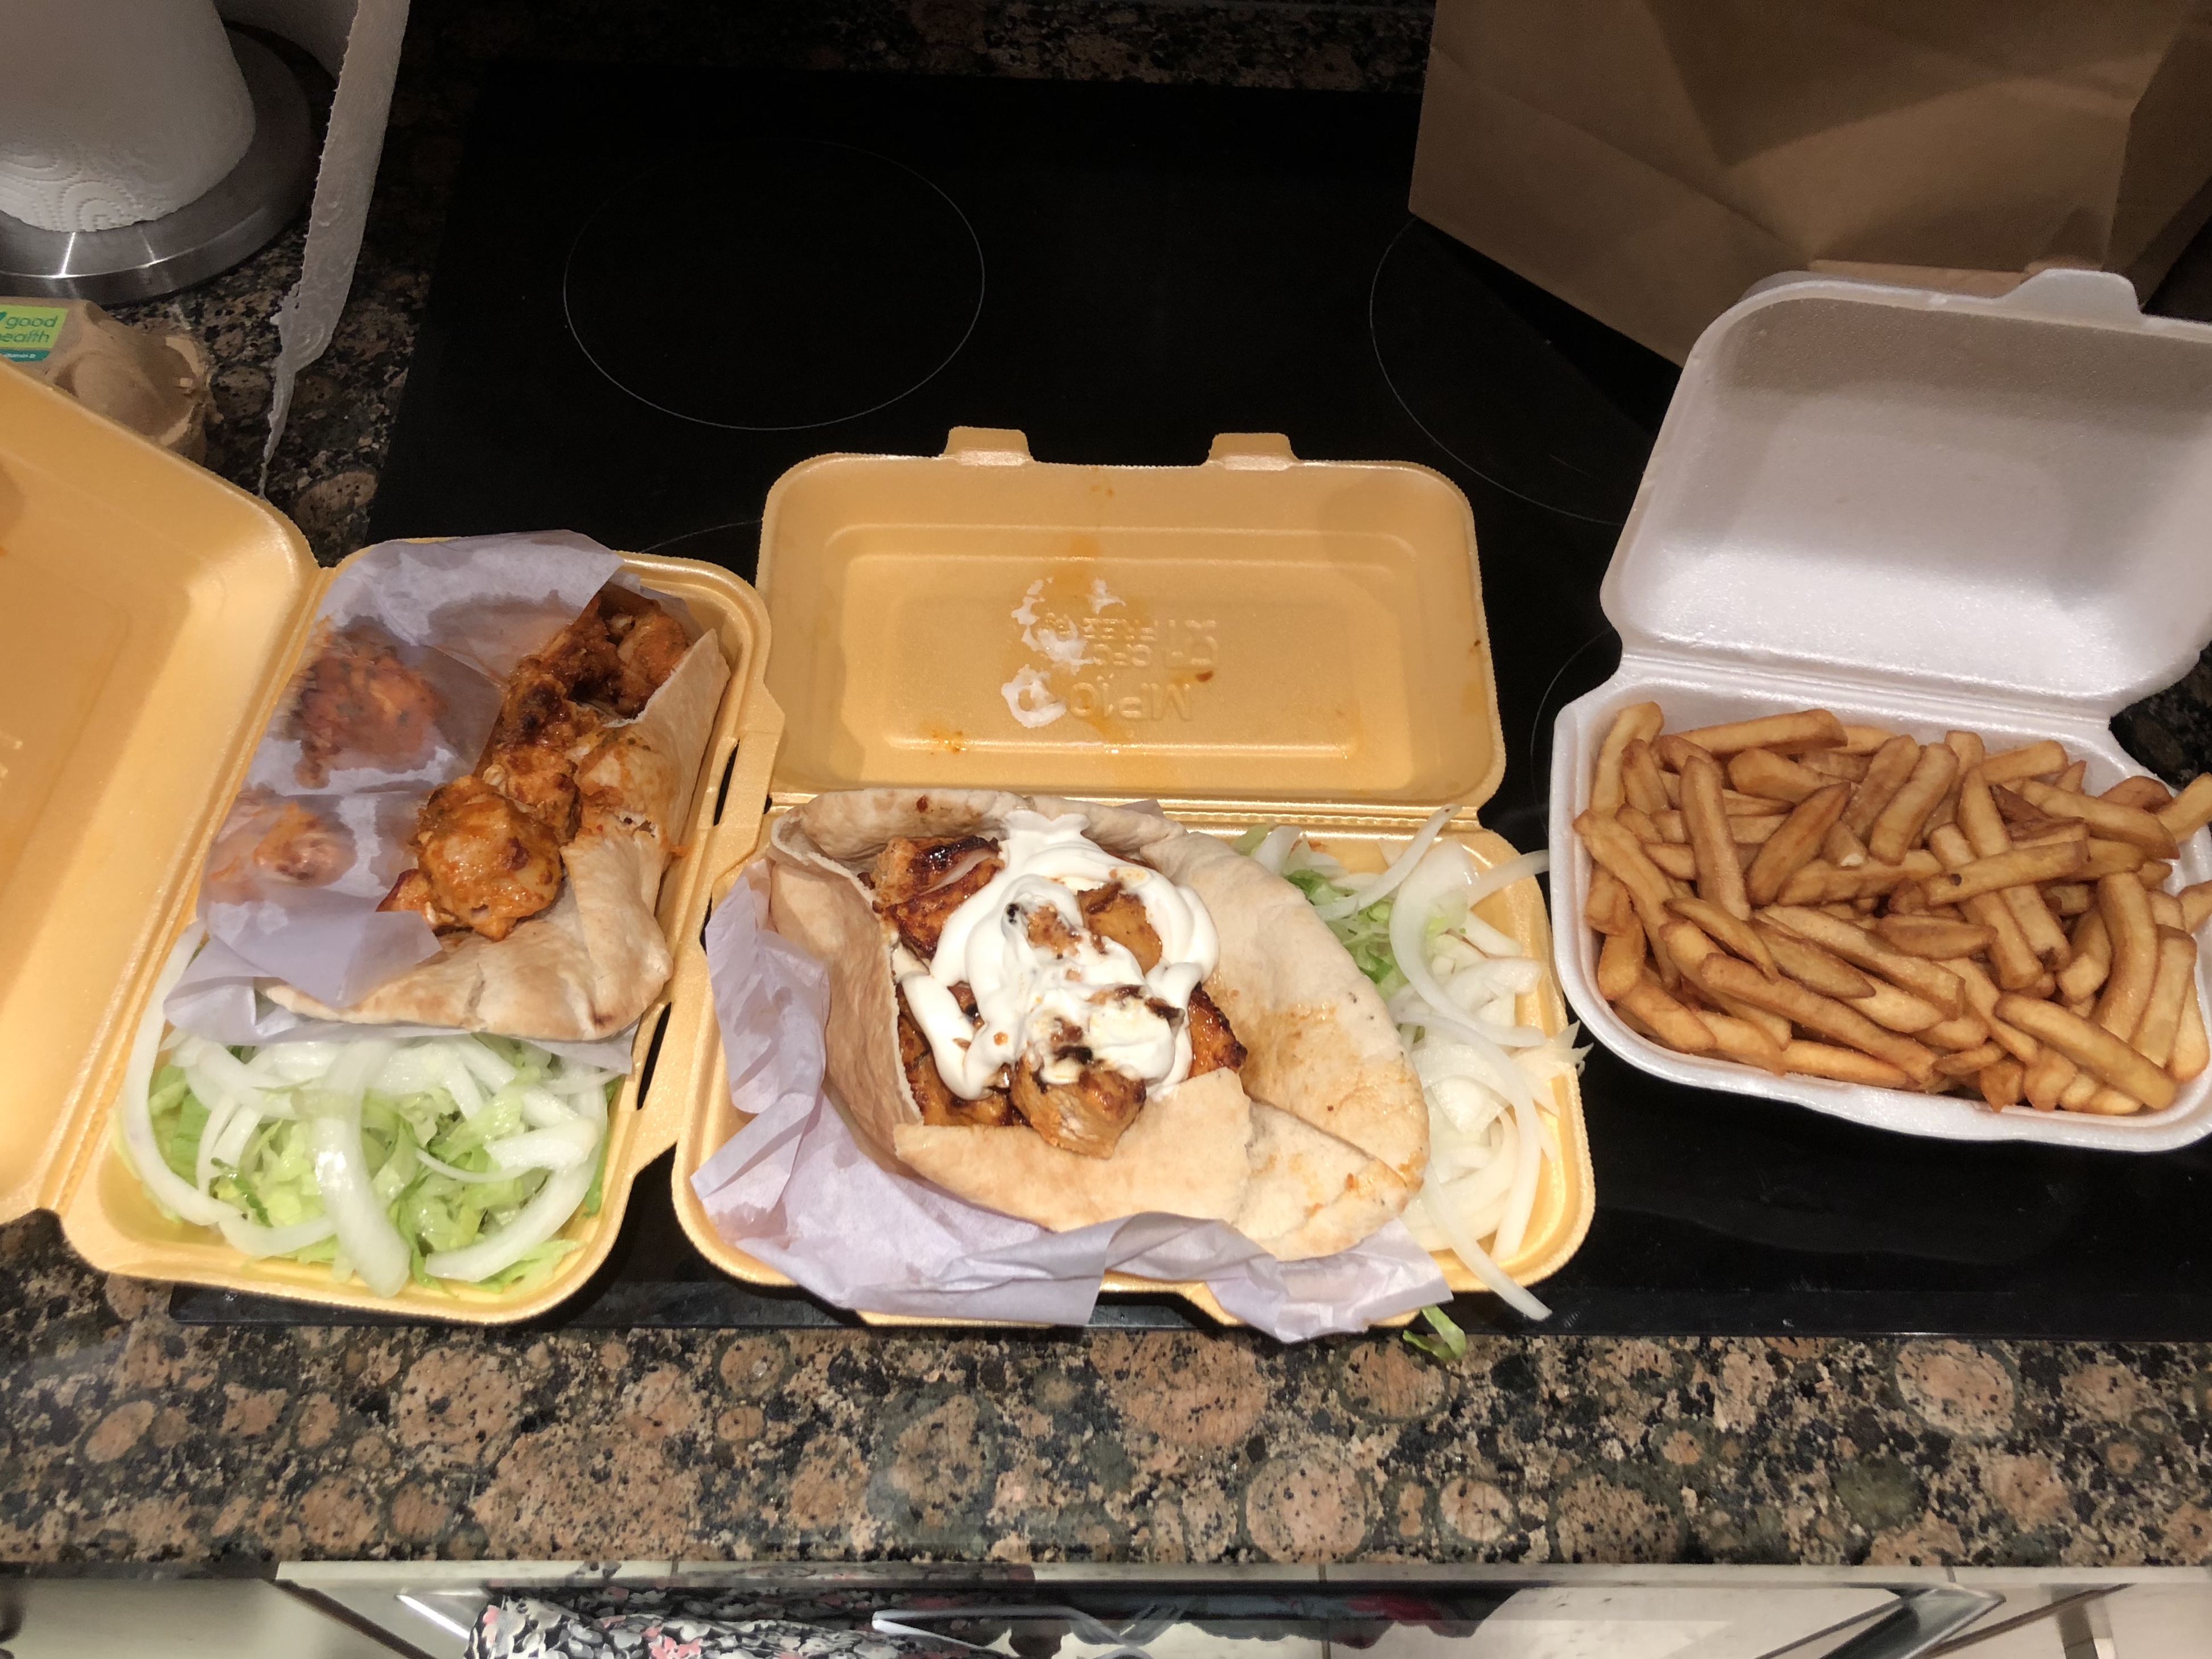 Dirty Takeaway Pictures Volume 3 - Page 255 - Food, Drink & Restaurants - PistonHeads